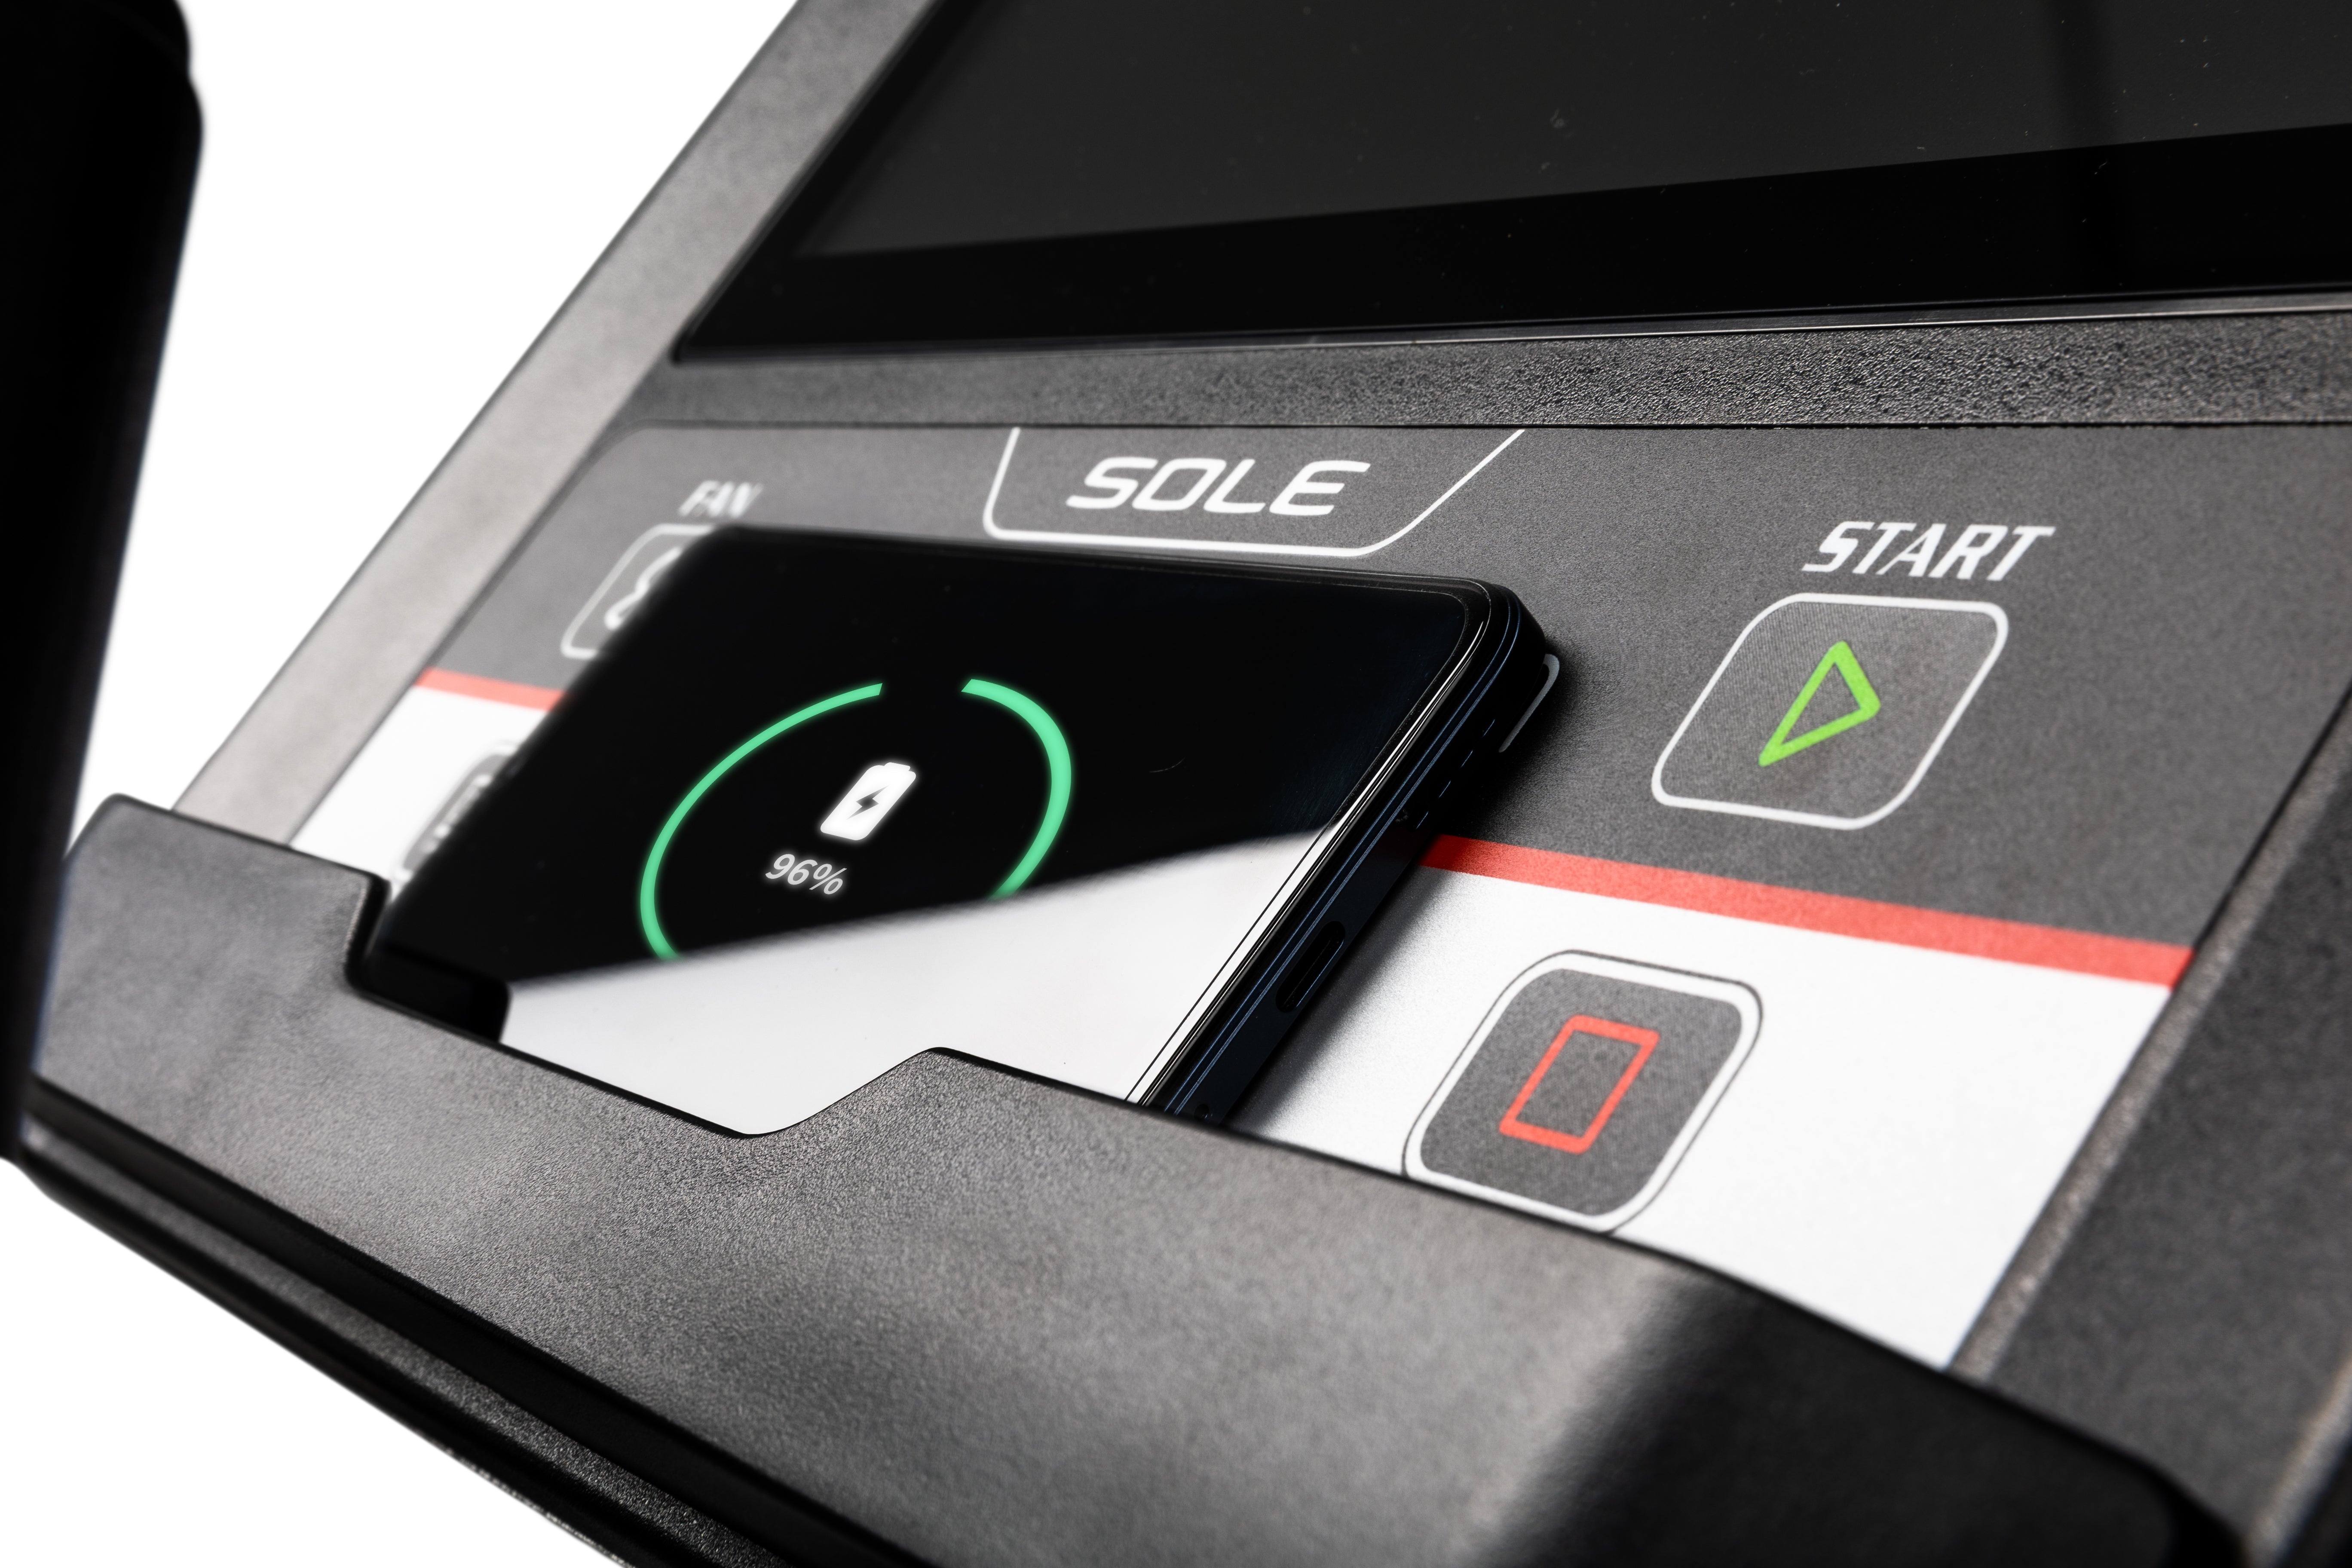 Close-up view of the Sole E95 elliptical trainer's control panel, displaying the SOLE branding, a smartphone with a charging indication of 98%, and tactile buttons labeled 'START' and a stop symbol.